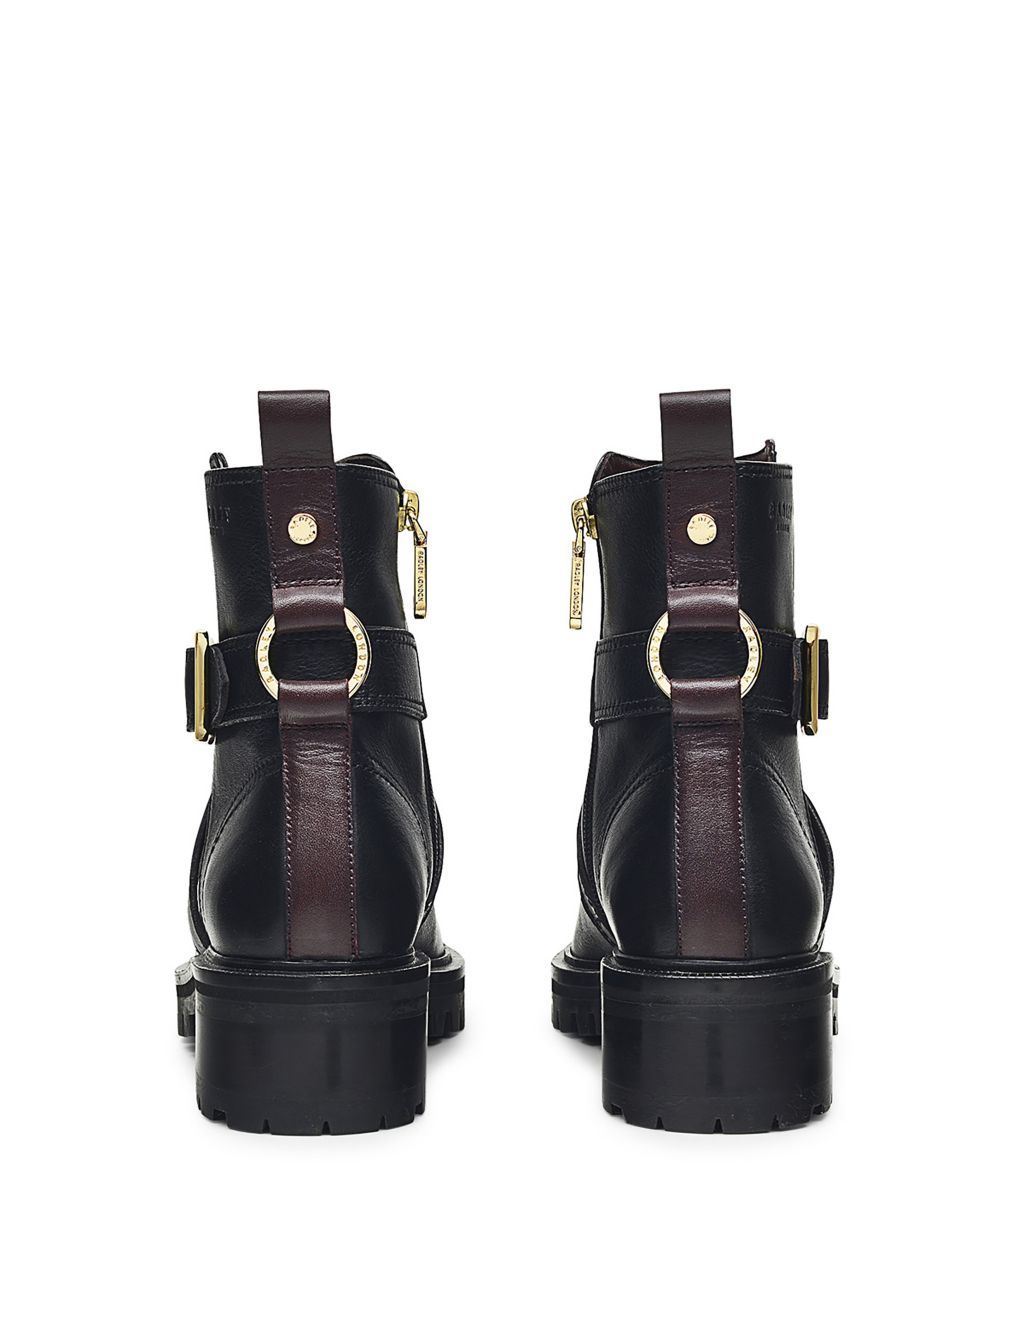 Leather Chunky Buckle Ankle Boots image 4